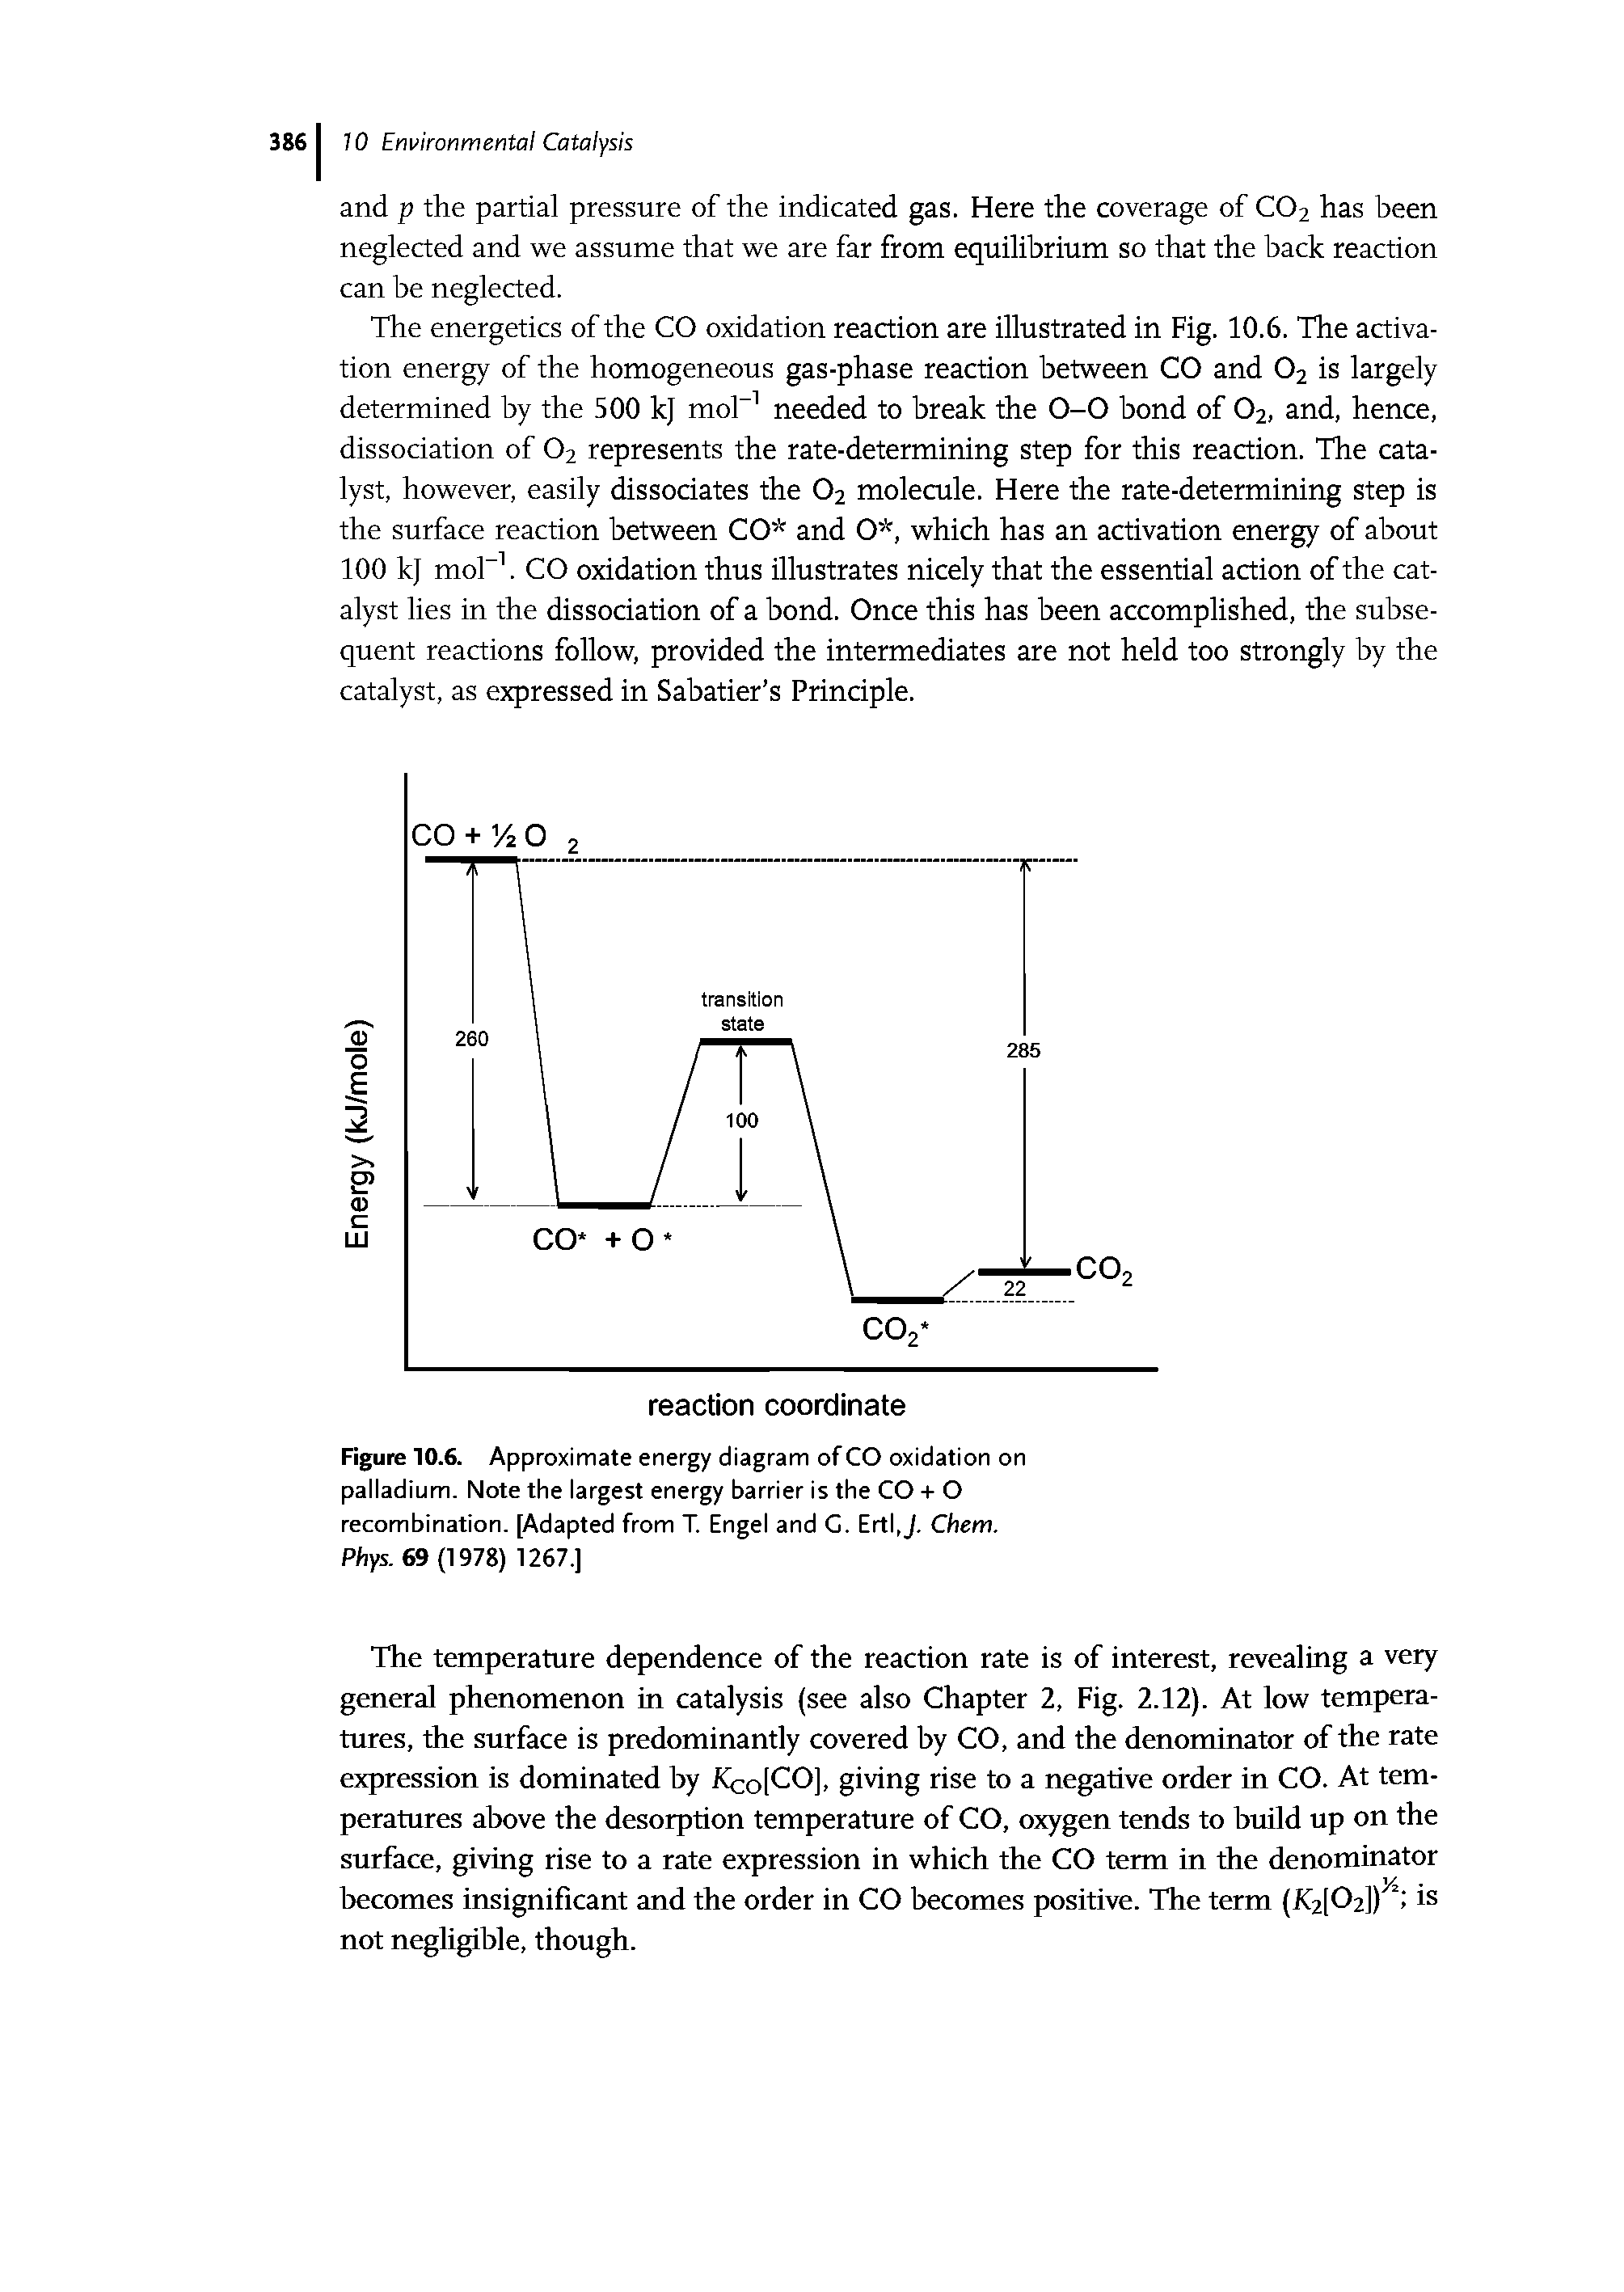 Figure 10.6. Approximate energy diagram of CO oxidation on palladium. Note the largest energy barrier is the CO + O recombination. [Adapted from T. Engel and G. Ertl.J, Chem. Rhys. 69 (1978) 1267.]...